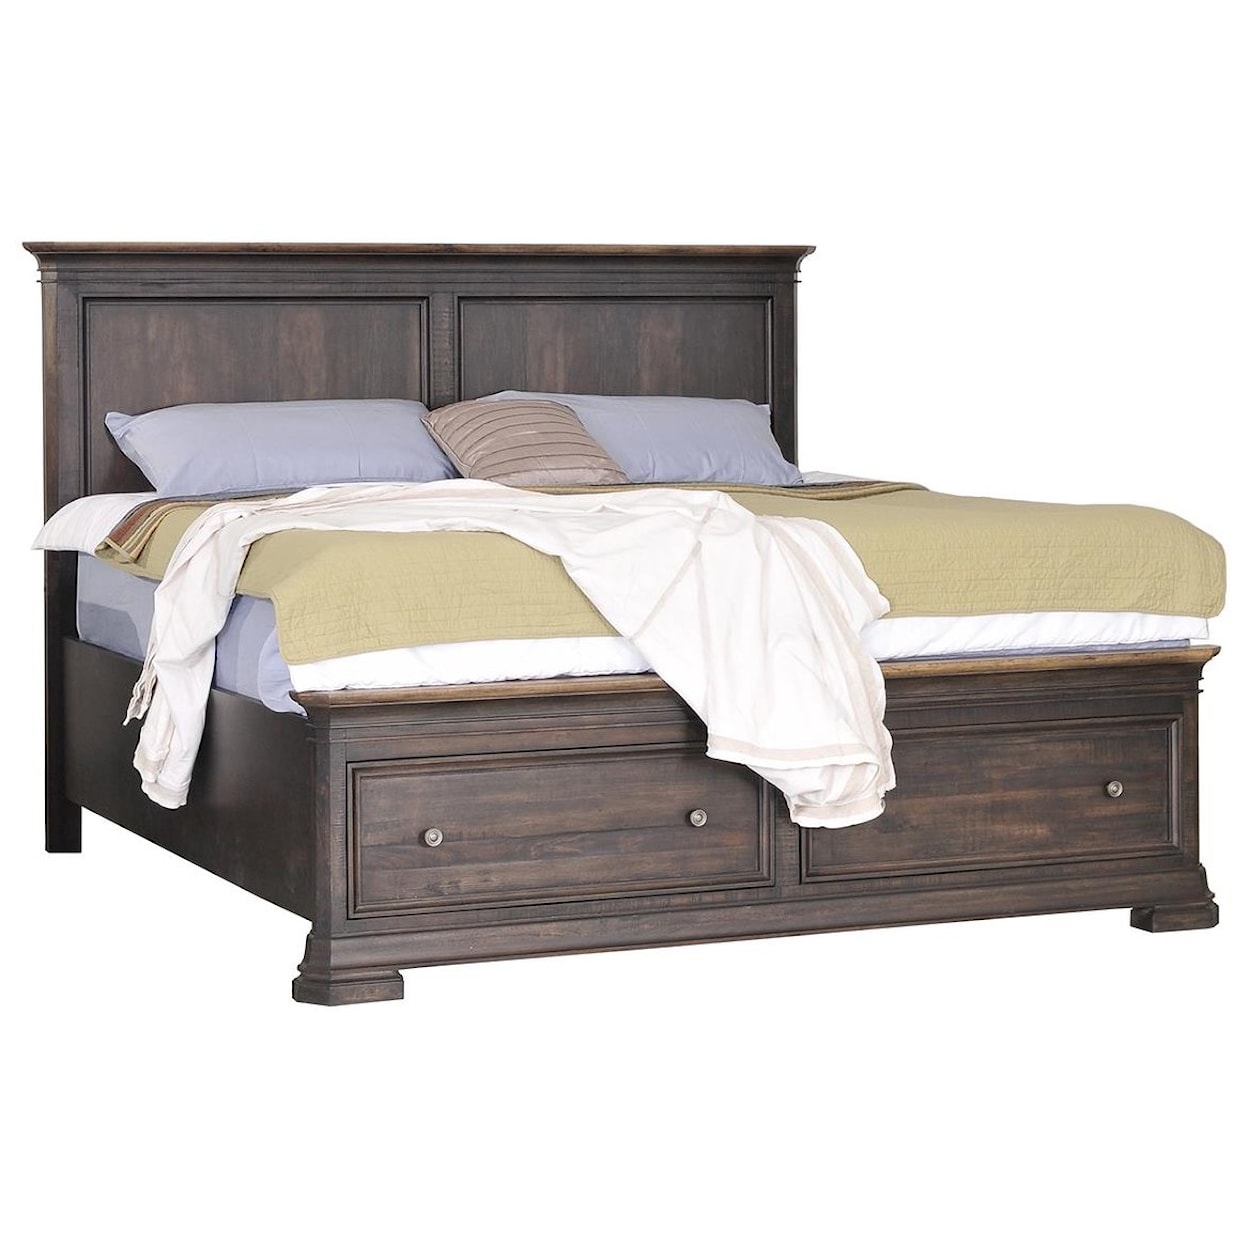 Napa Furniture Design Grand Louie Queen Panel Bed with Storage